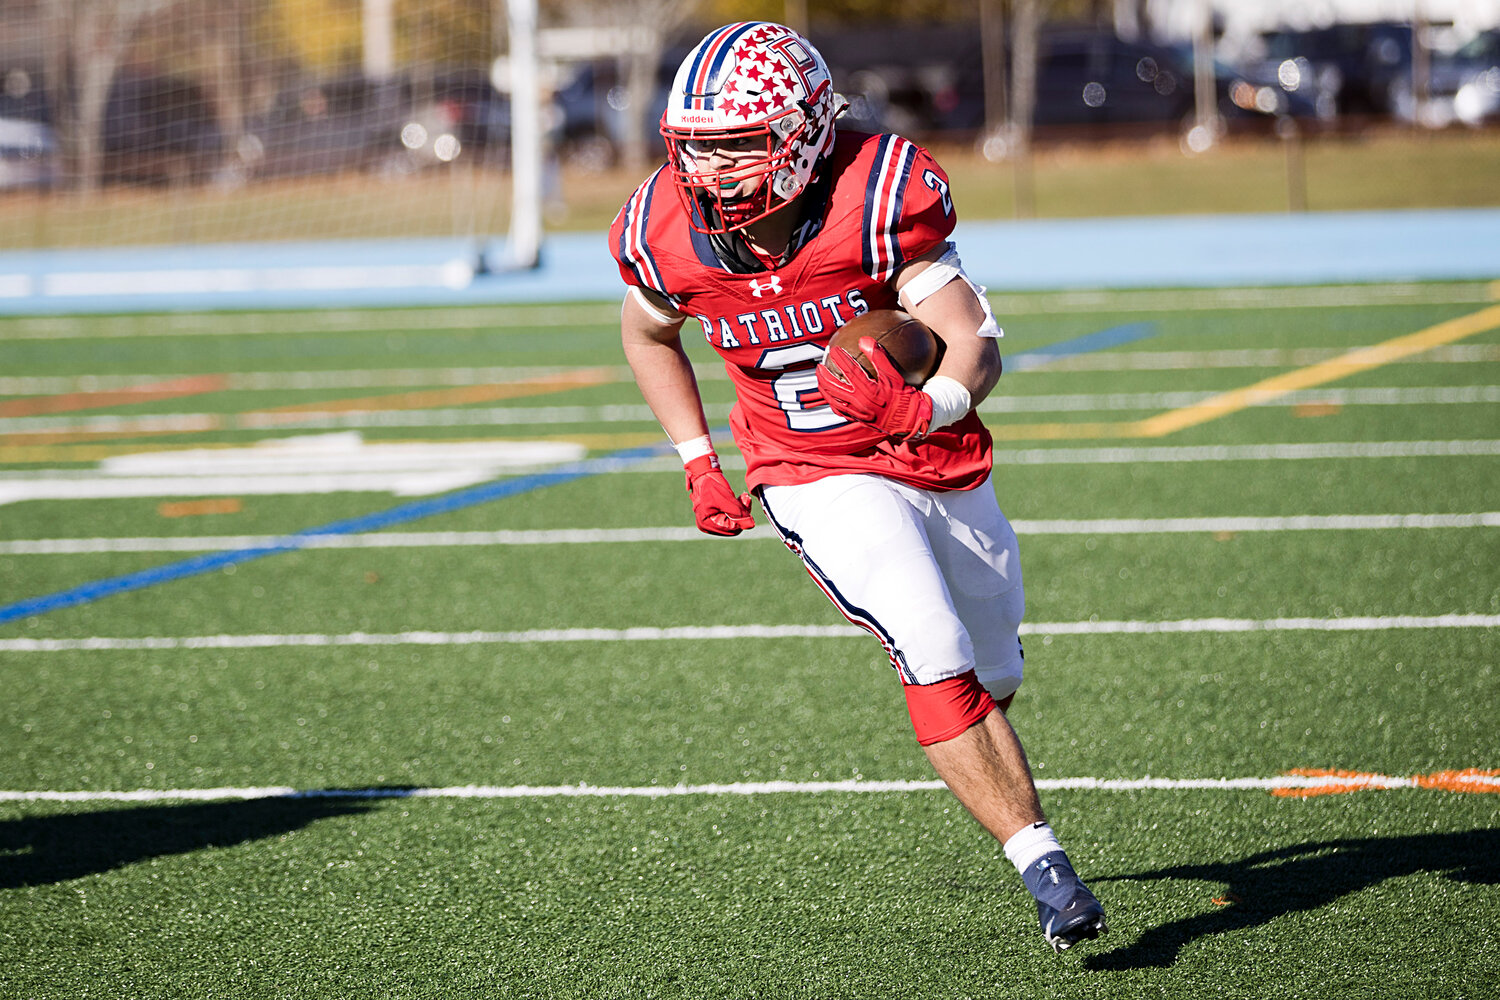 Adam Conheeny races upfield after intercepting a pass in the second half.